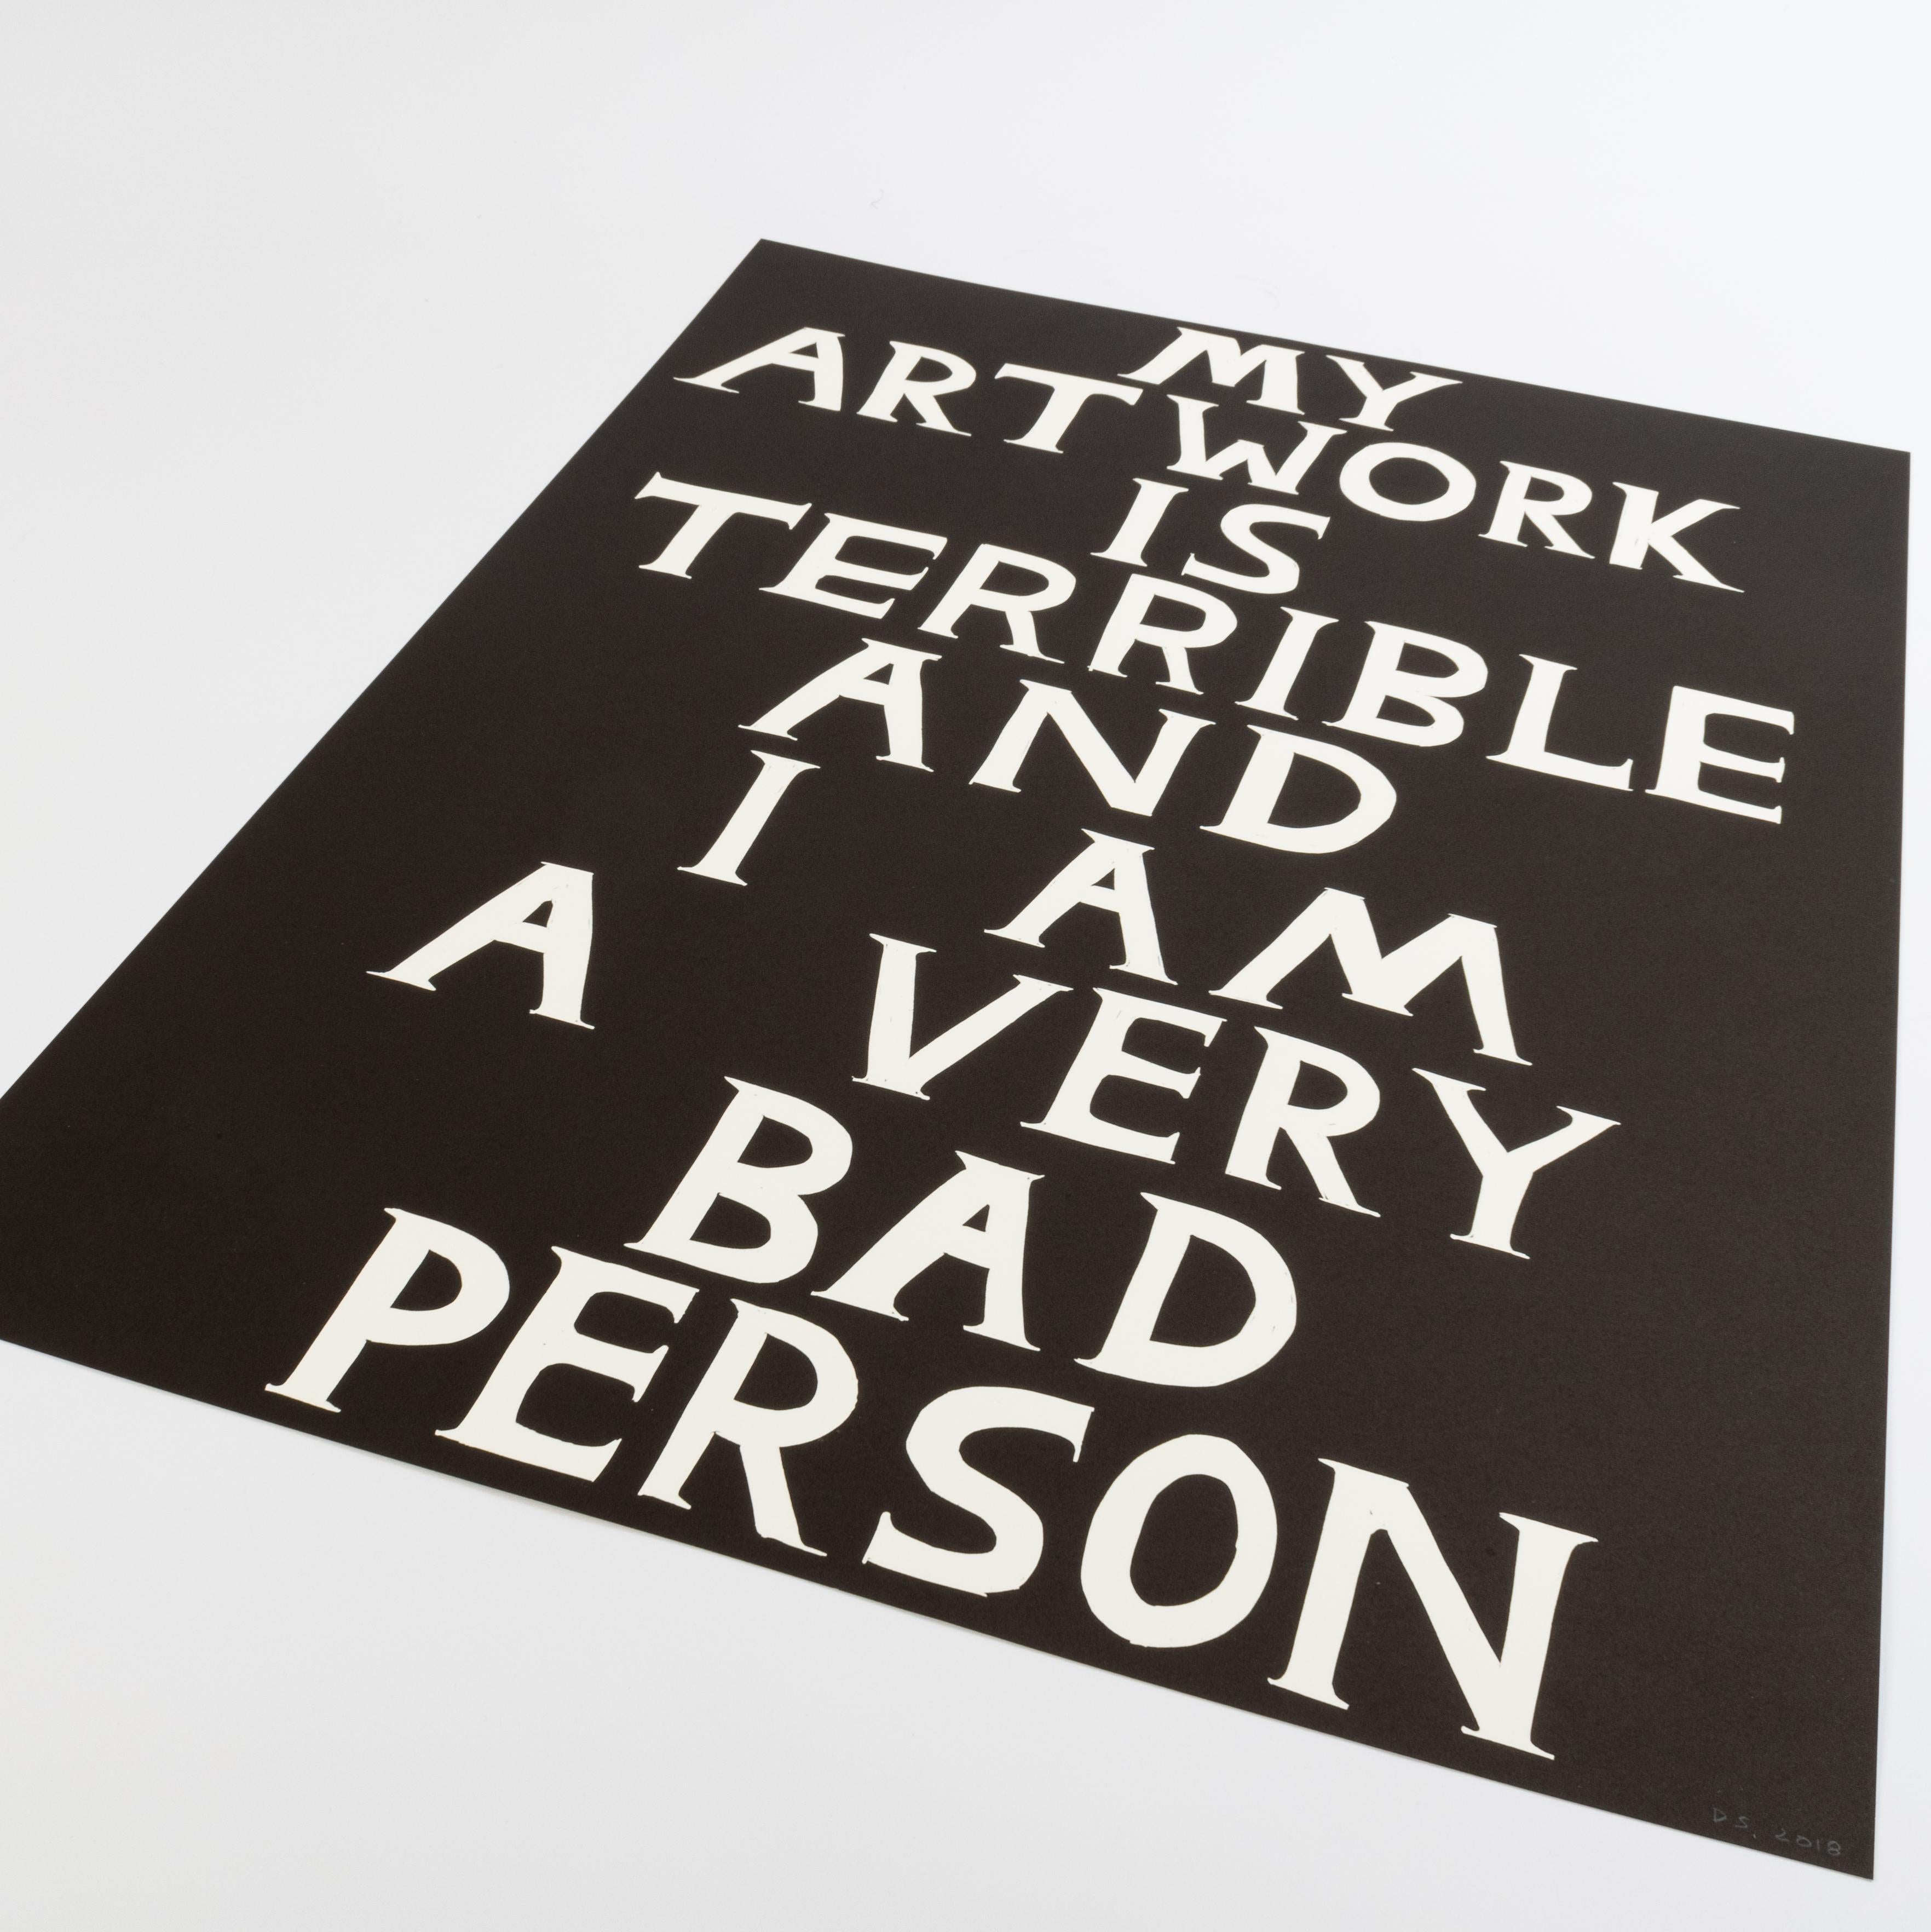 My Artwork is Terrible - Contemporary Print by David Shrigley